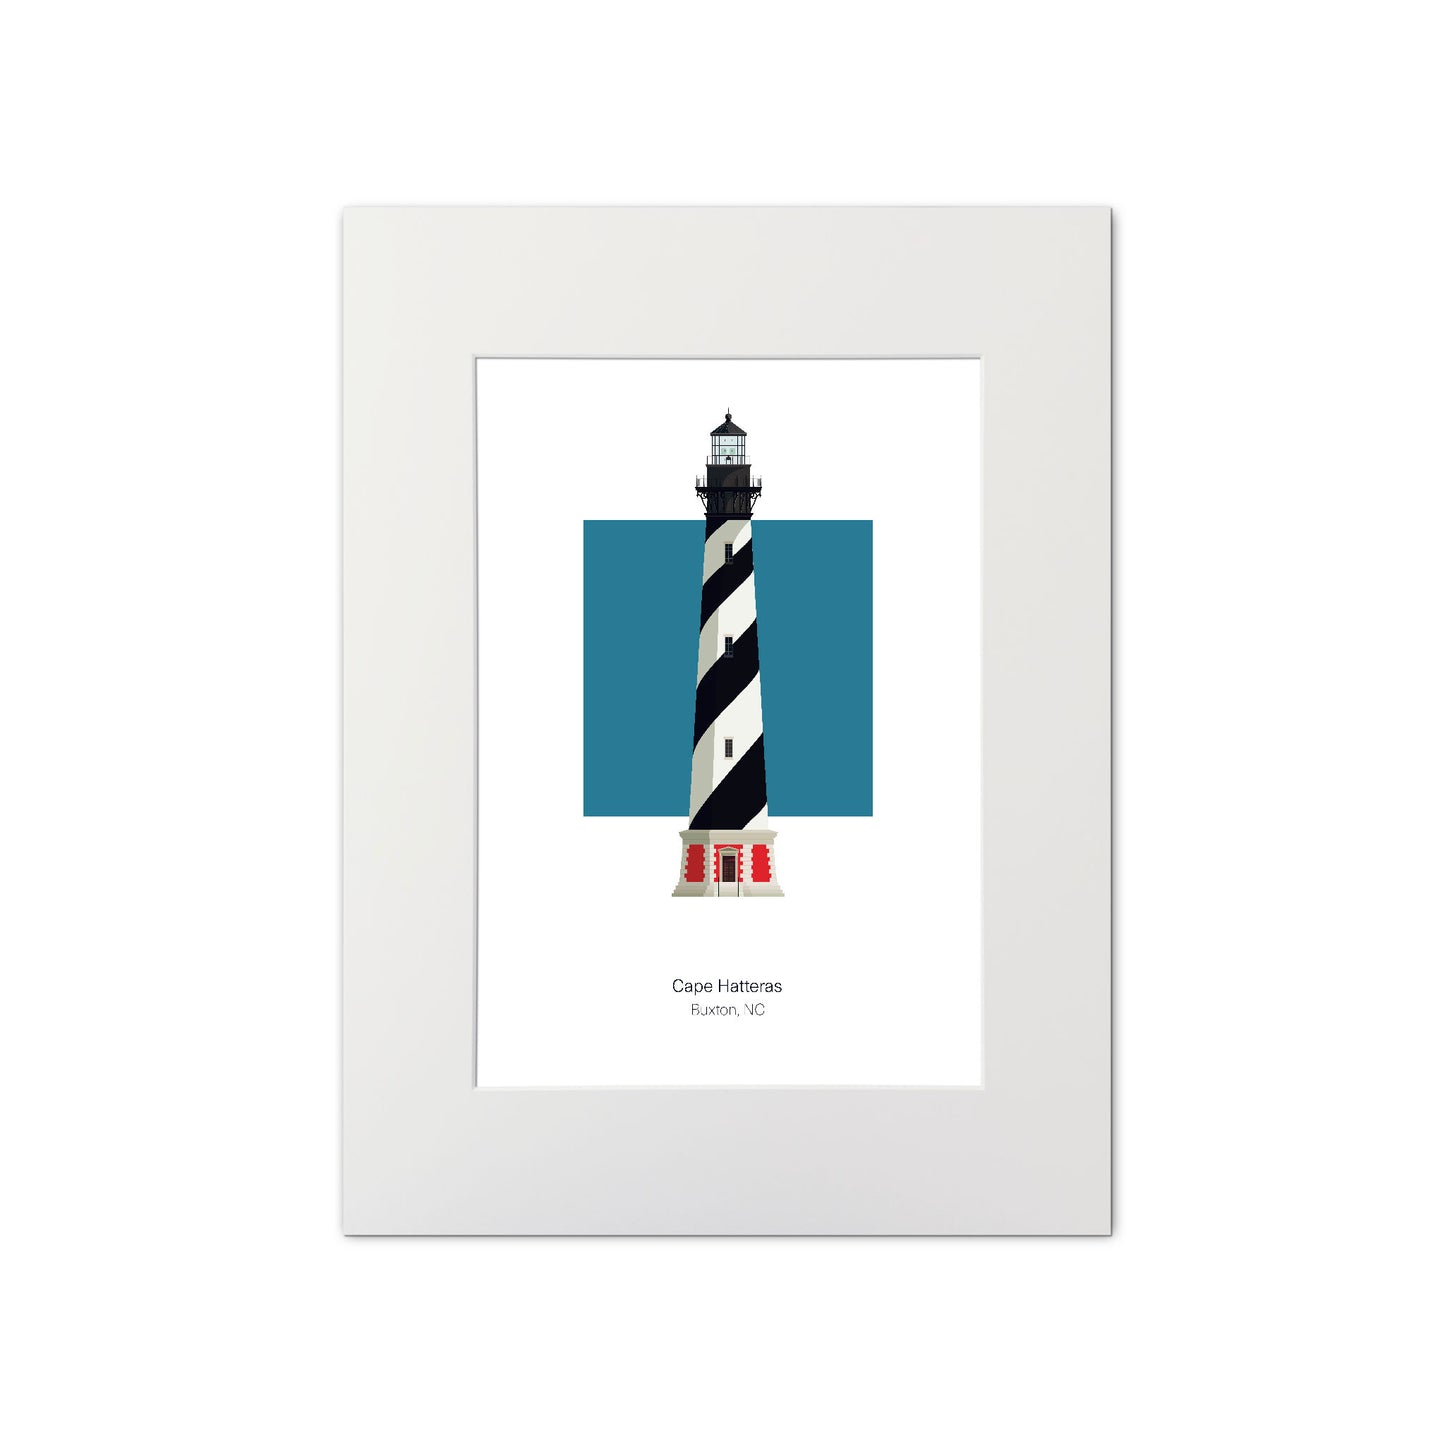 Illustration of the Cape Hatteras lighthouse, North Carolina, USA. On a white background with aqua blue square as a backdrop., mounted and measuring 11"x14" (30x40cm).